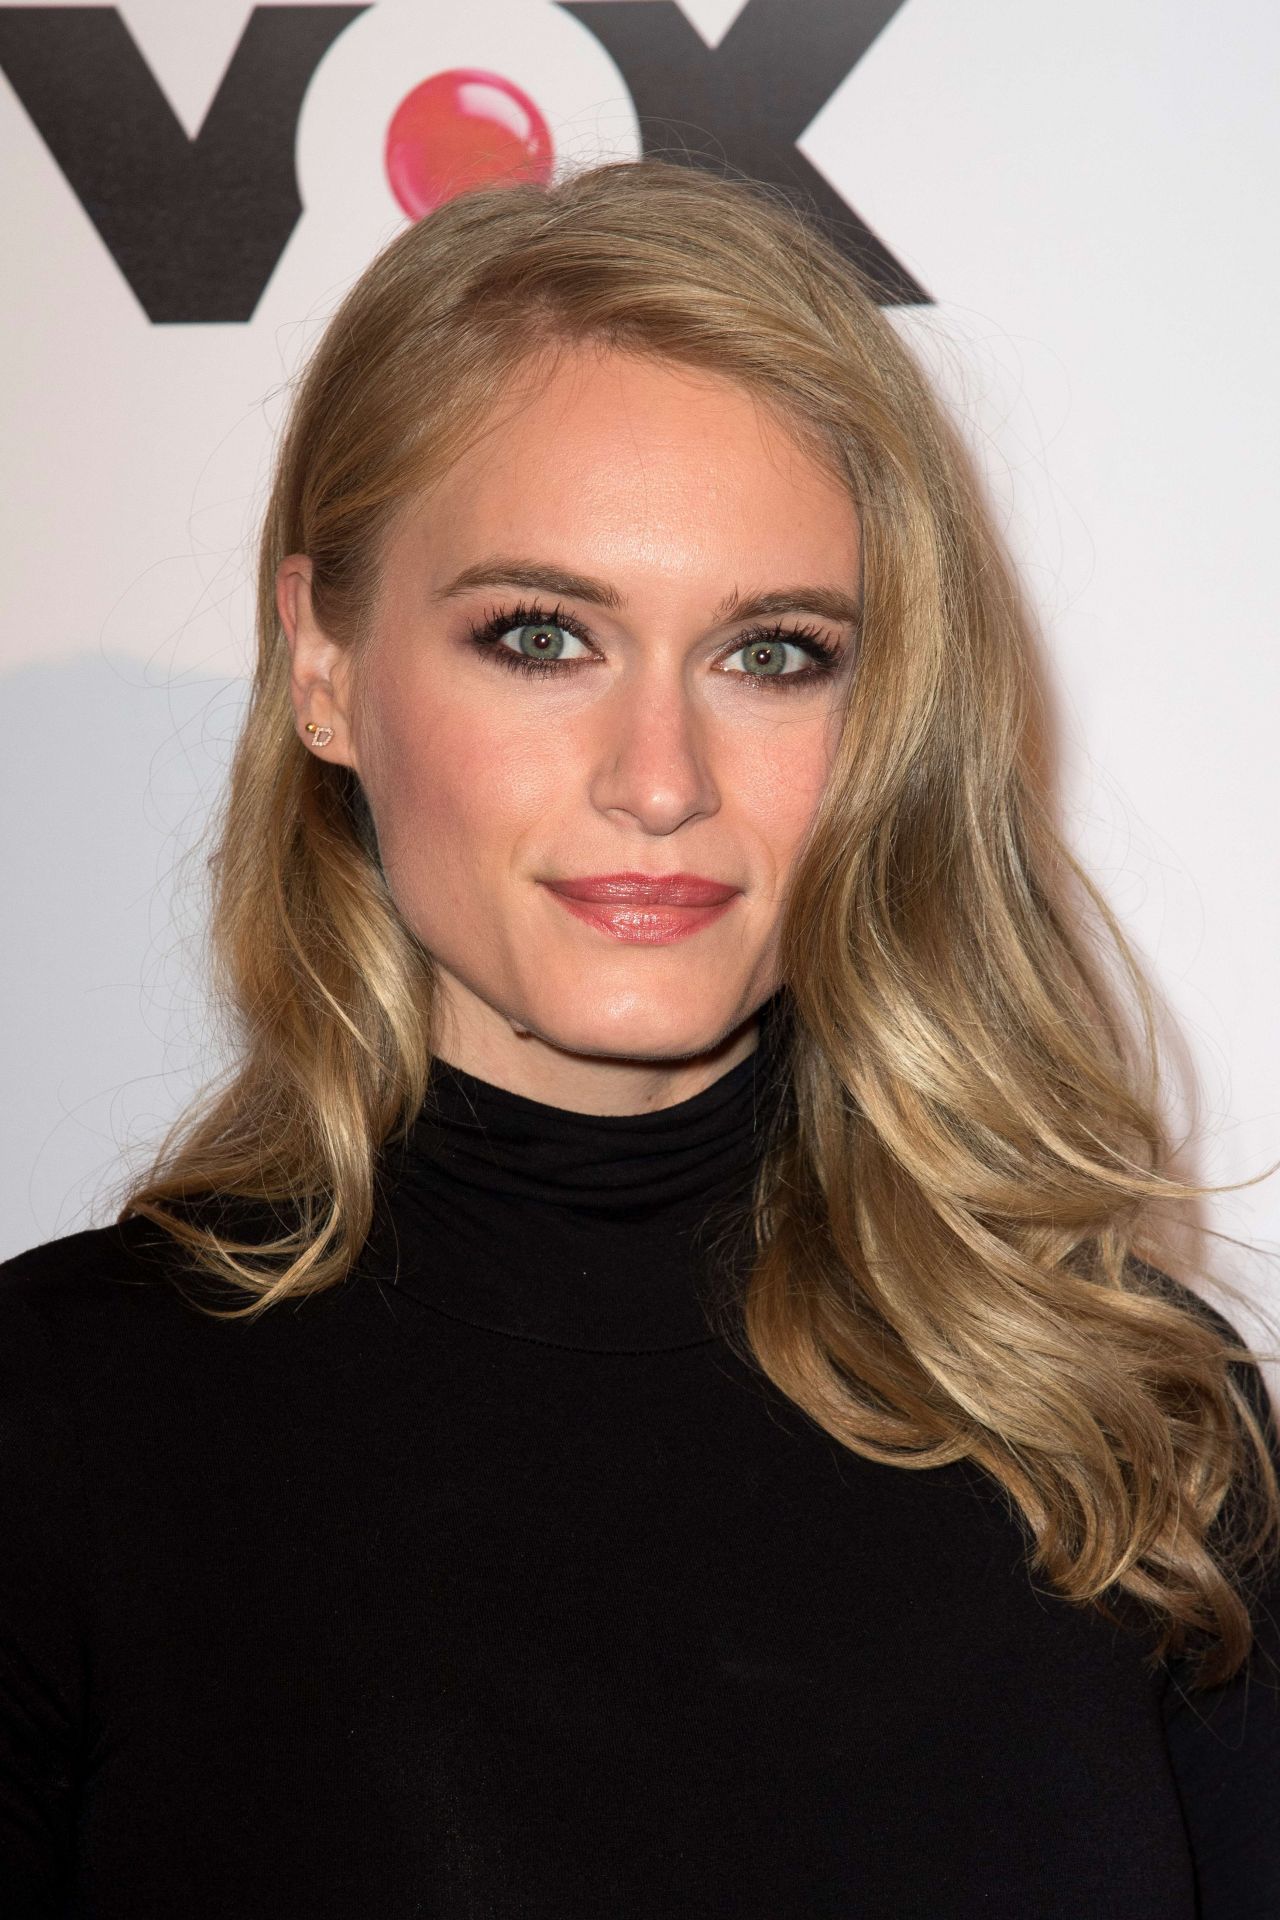 leven-rambin-gone-tv-series-photocall-in-paris-12-13-2017